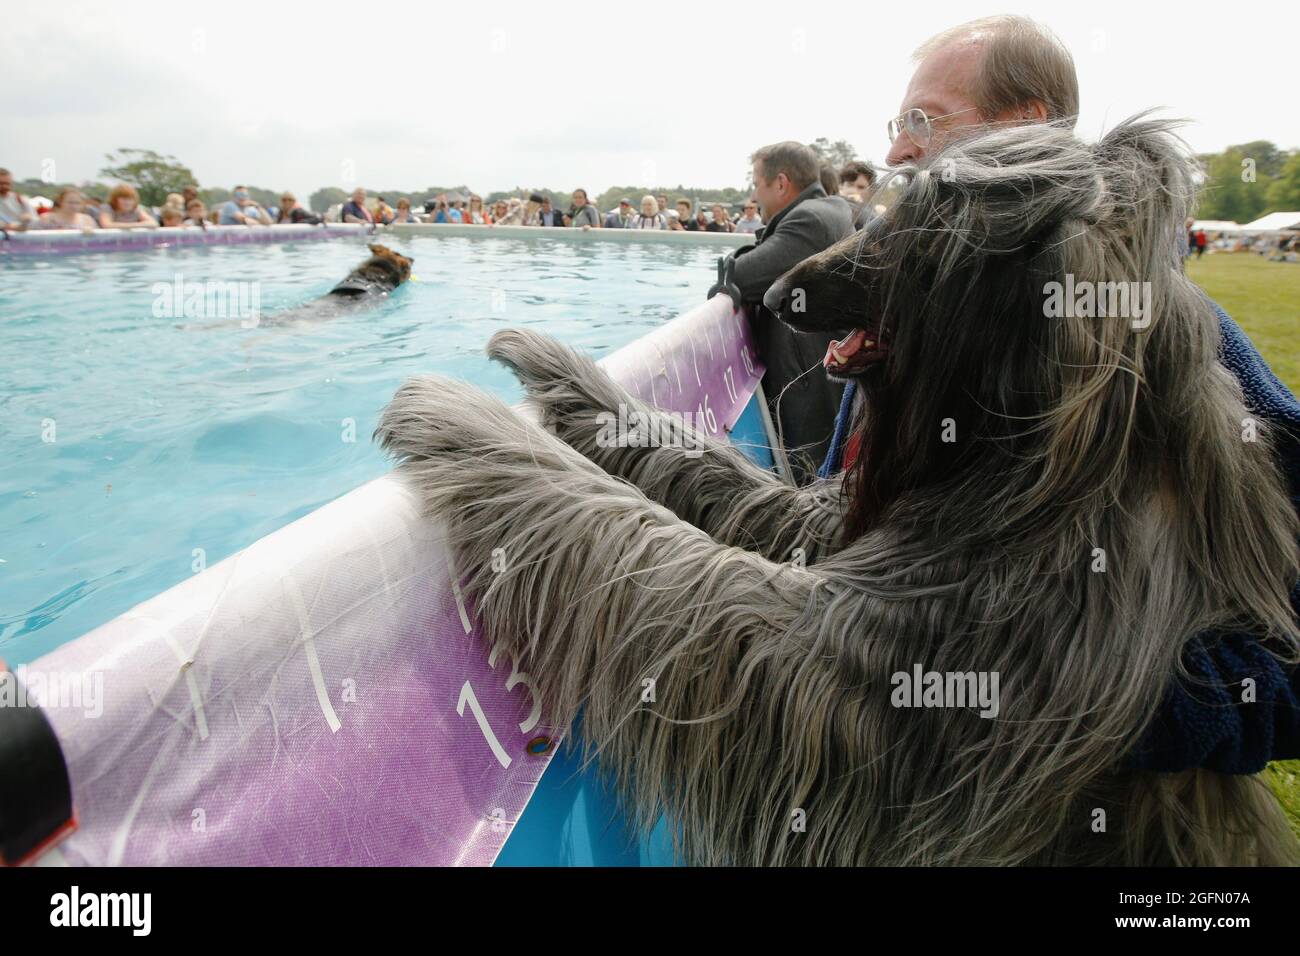 Am afghan hound watches another dog swim in the pool at Dogstival, festival for dogs at Pylewell Park near Lymington, in the New Forest, UK Saturday 1 Stock Photo